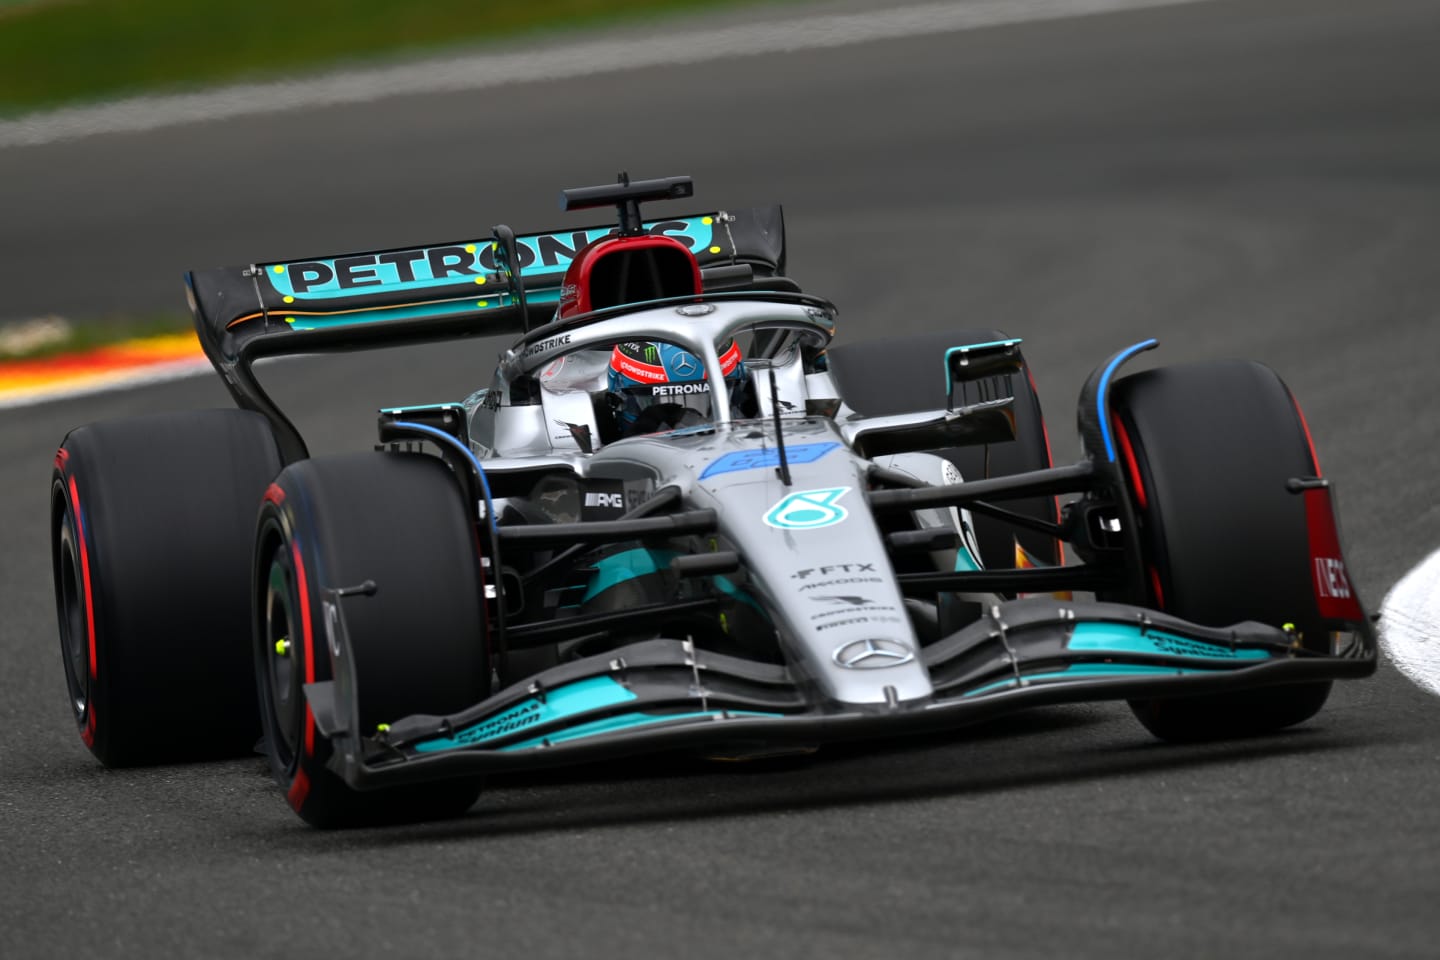 SPA, BELGIUM - AUGUST 26: George Russell of Great Britain driving the (63) Mercedes AMG Petronas F1 Team W13 on track during practice ahead of the F1 Grand Prix of Belgium at Circuit de Spa-Francorchamps on August 26, 2022 in Spa, Belgium. (Photo by Dan Mullan/Getty Images)